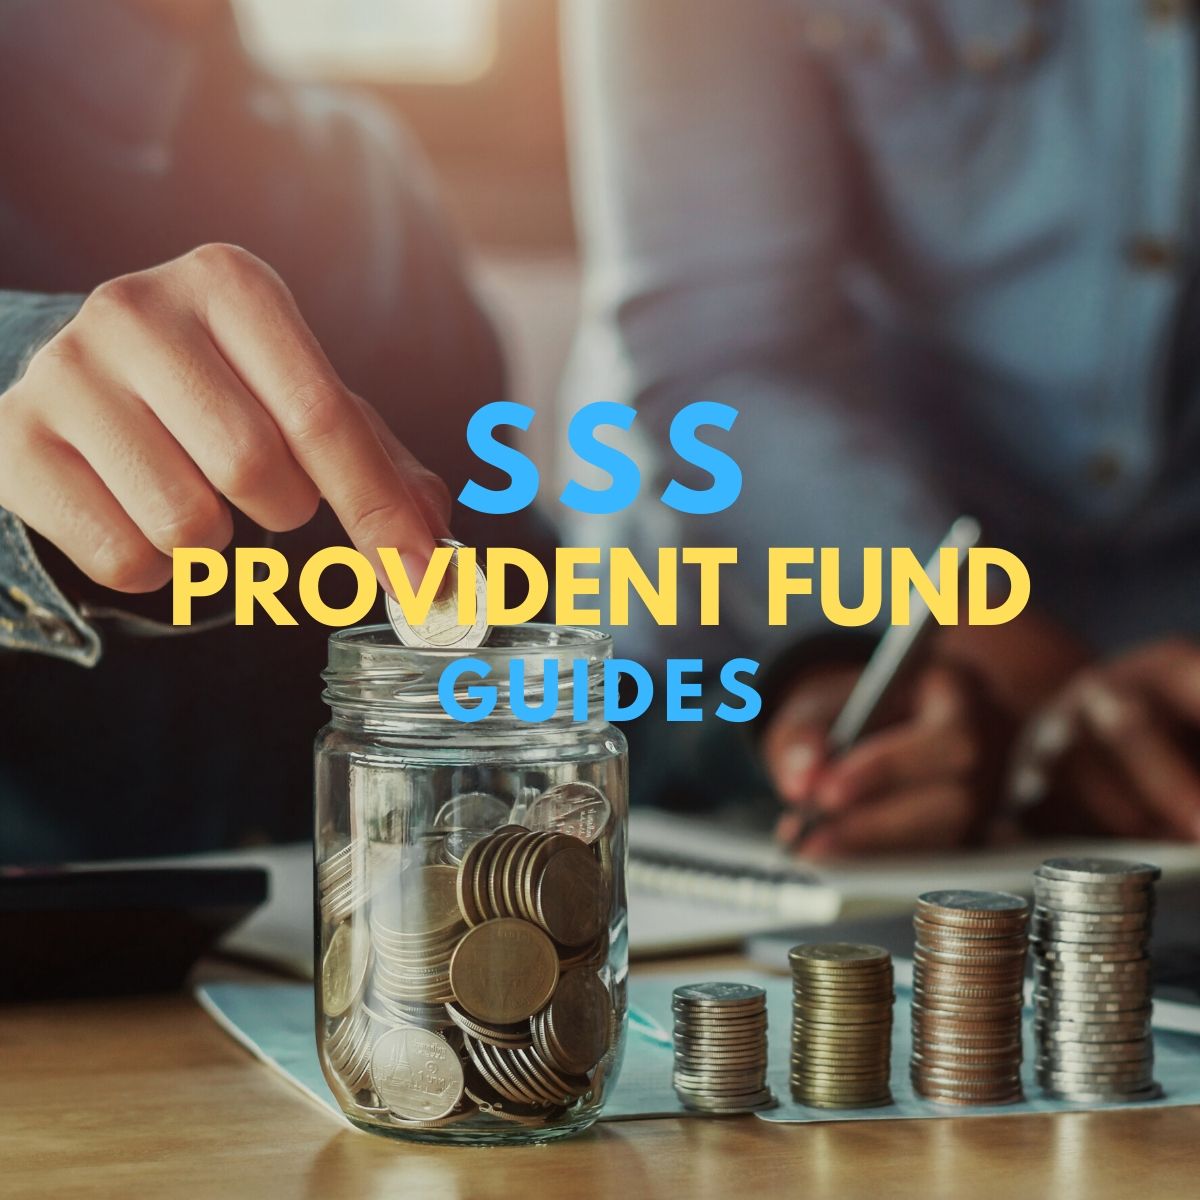 sss provident fund guides for employees, self employed voluntary ofw members